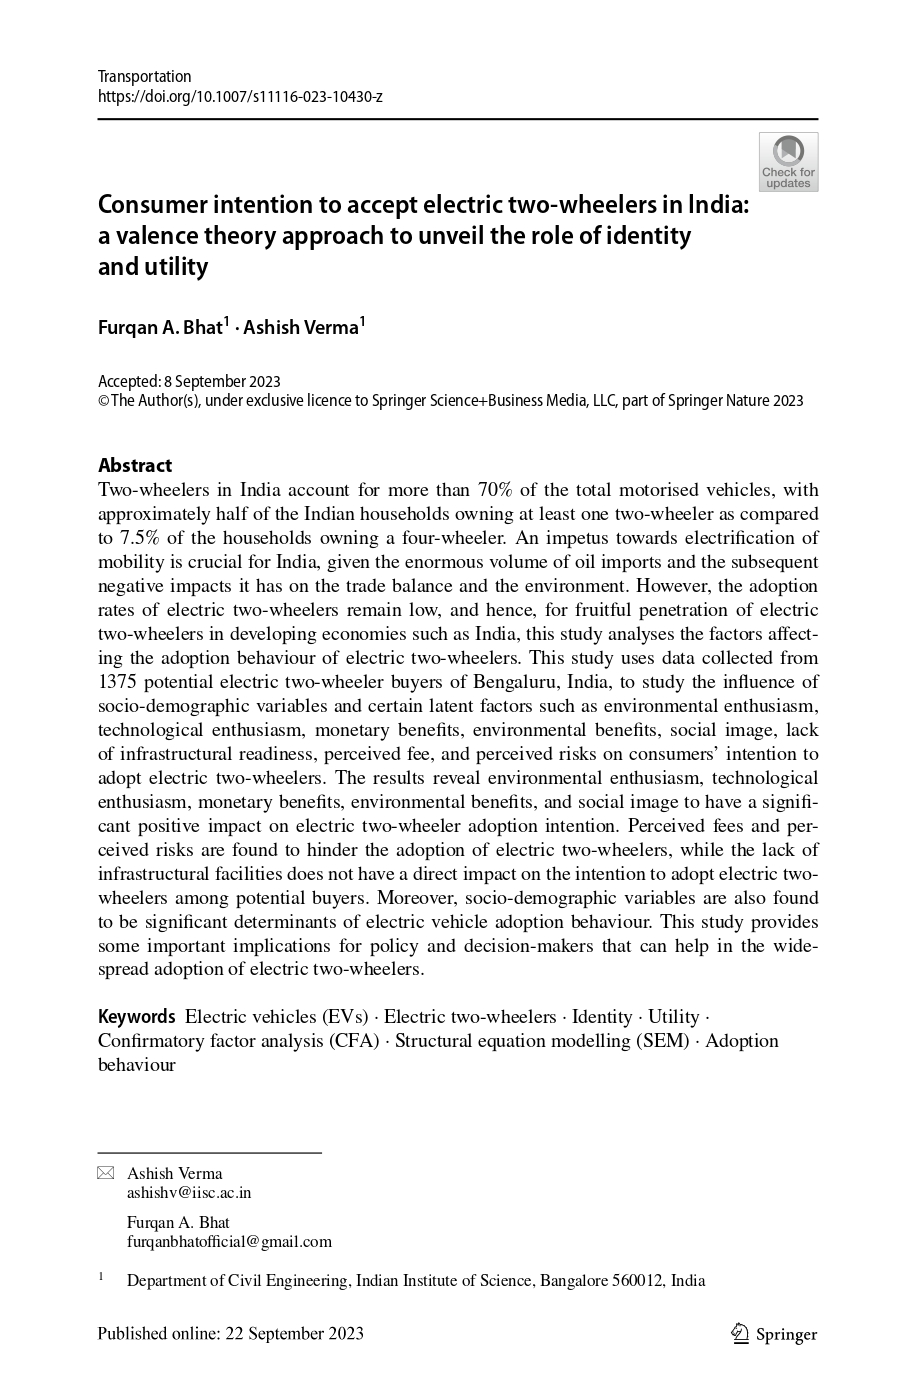 Consumer intention to accept electric two‑wheelers in India: a valence theory approach to unveil the role of identity and utility